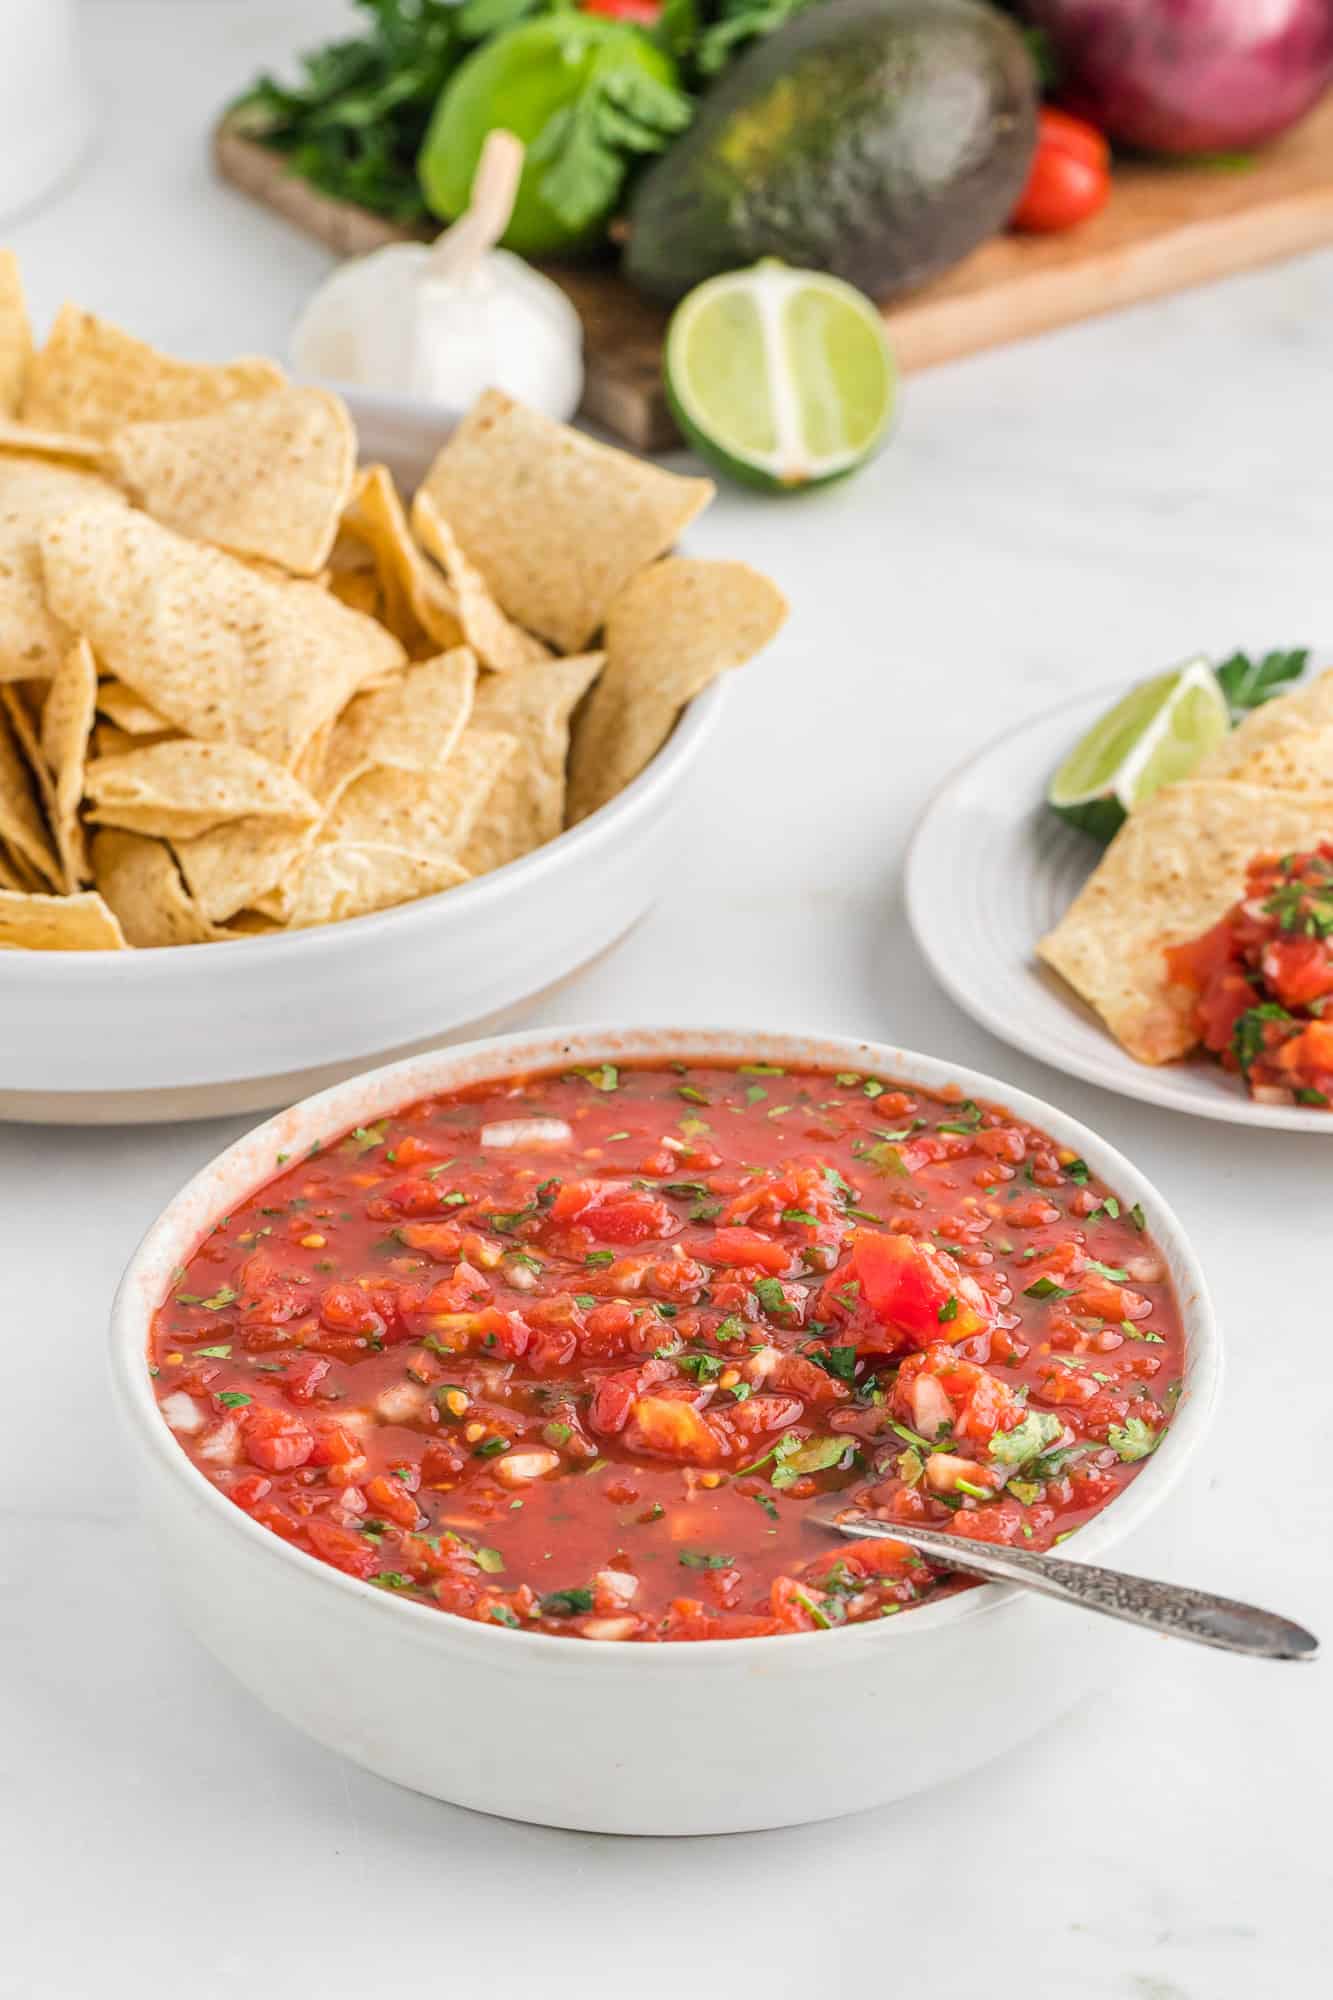 Salsa with chips in the background.